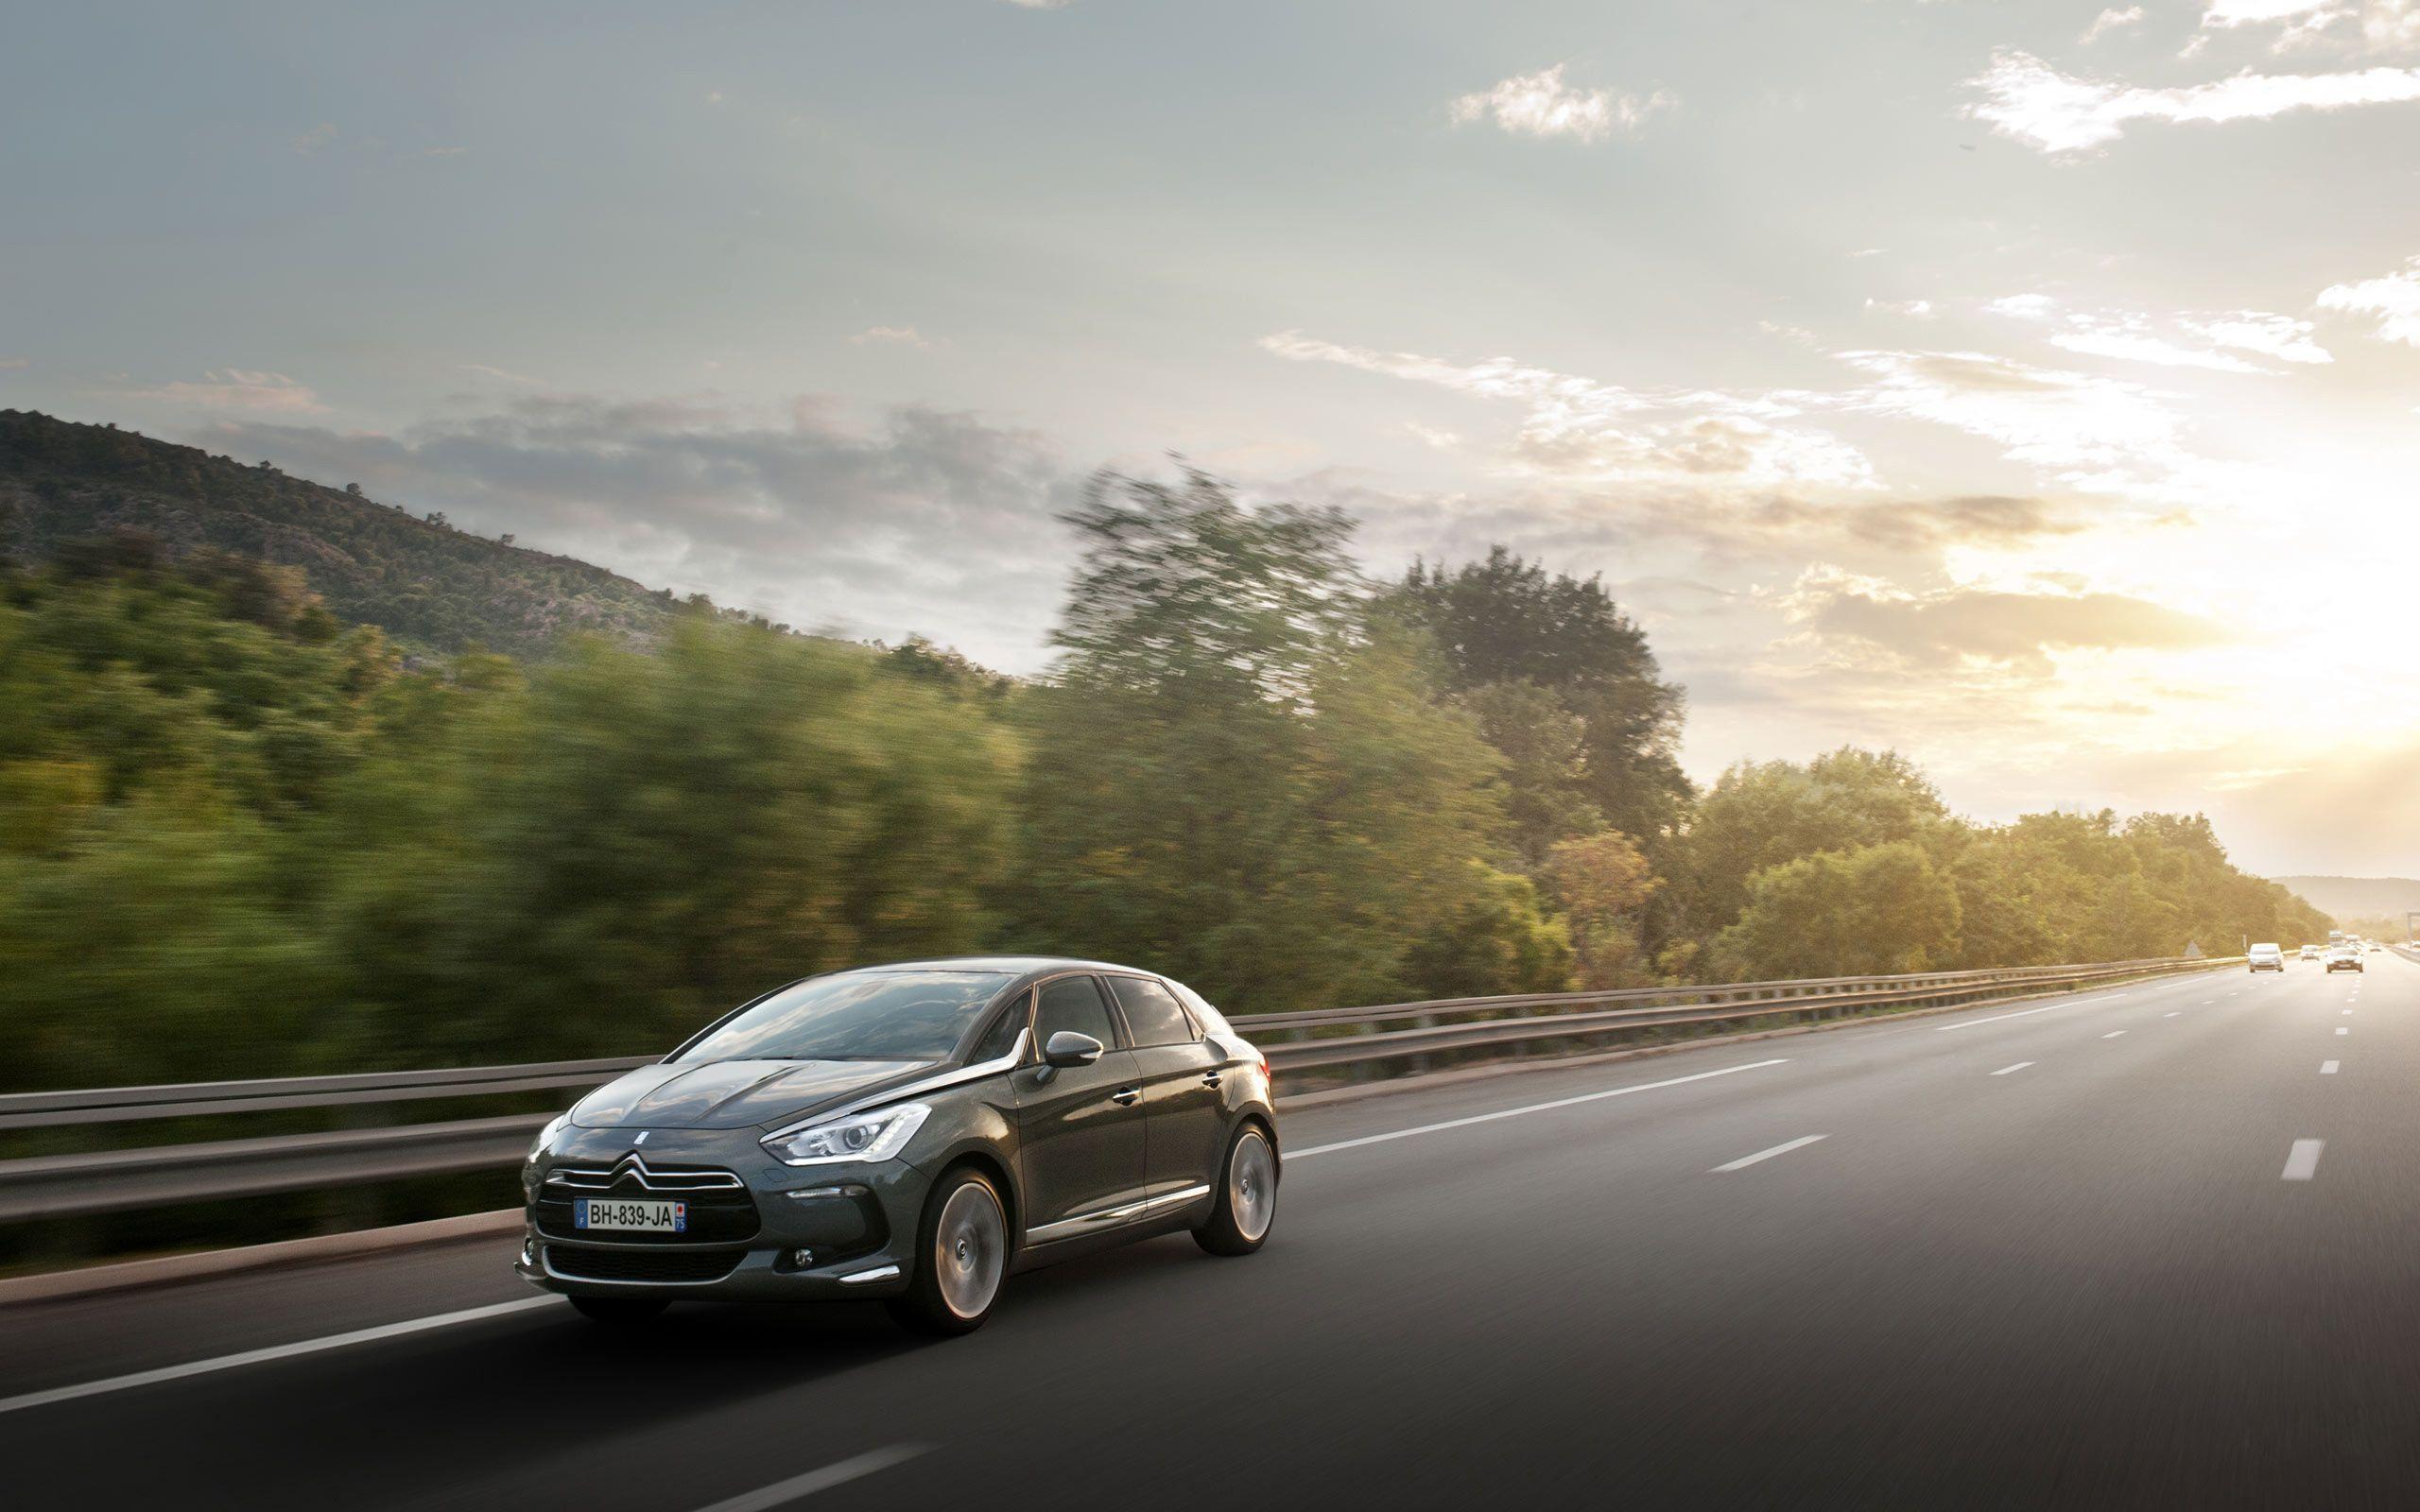 Citroen DS5 Wallpaper And Image, Picture, Photo